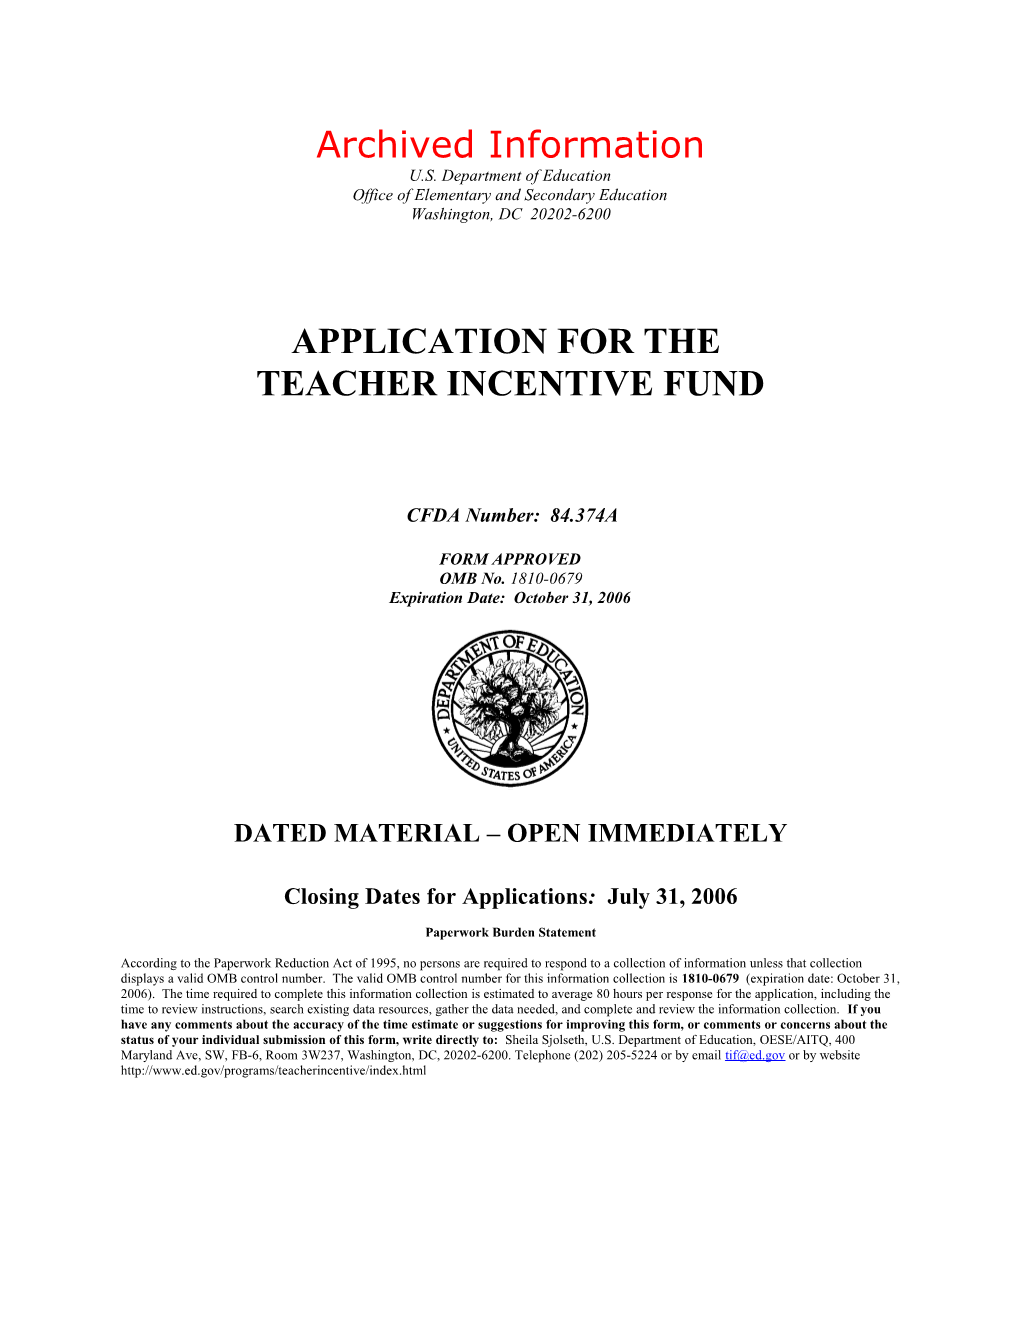 Archived: FY 2006 Application for the Teacher Incentive Fund Program (MS Word)